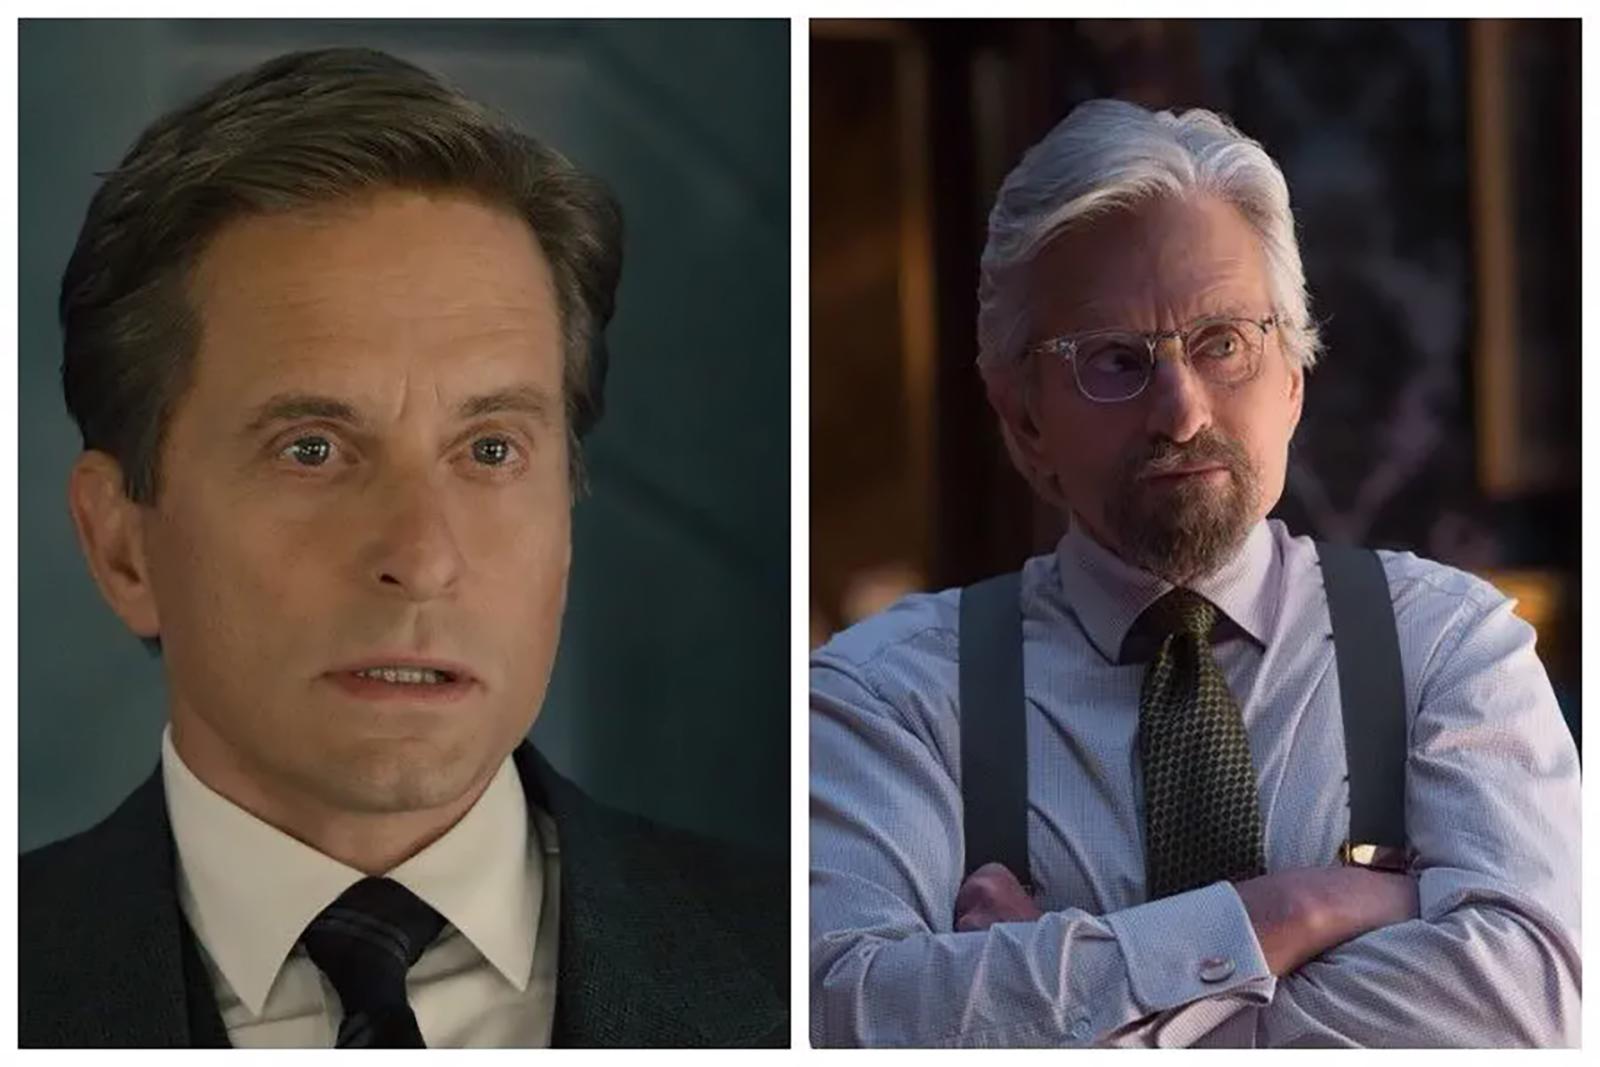 10 Times The Actors Were De-Aged For a Role And Looked Way Too Creepy - image 10